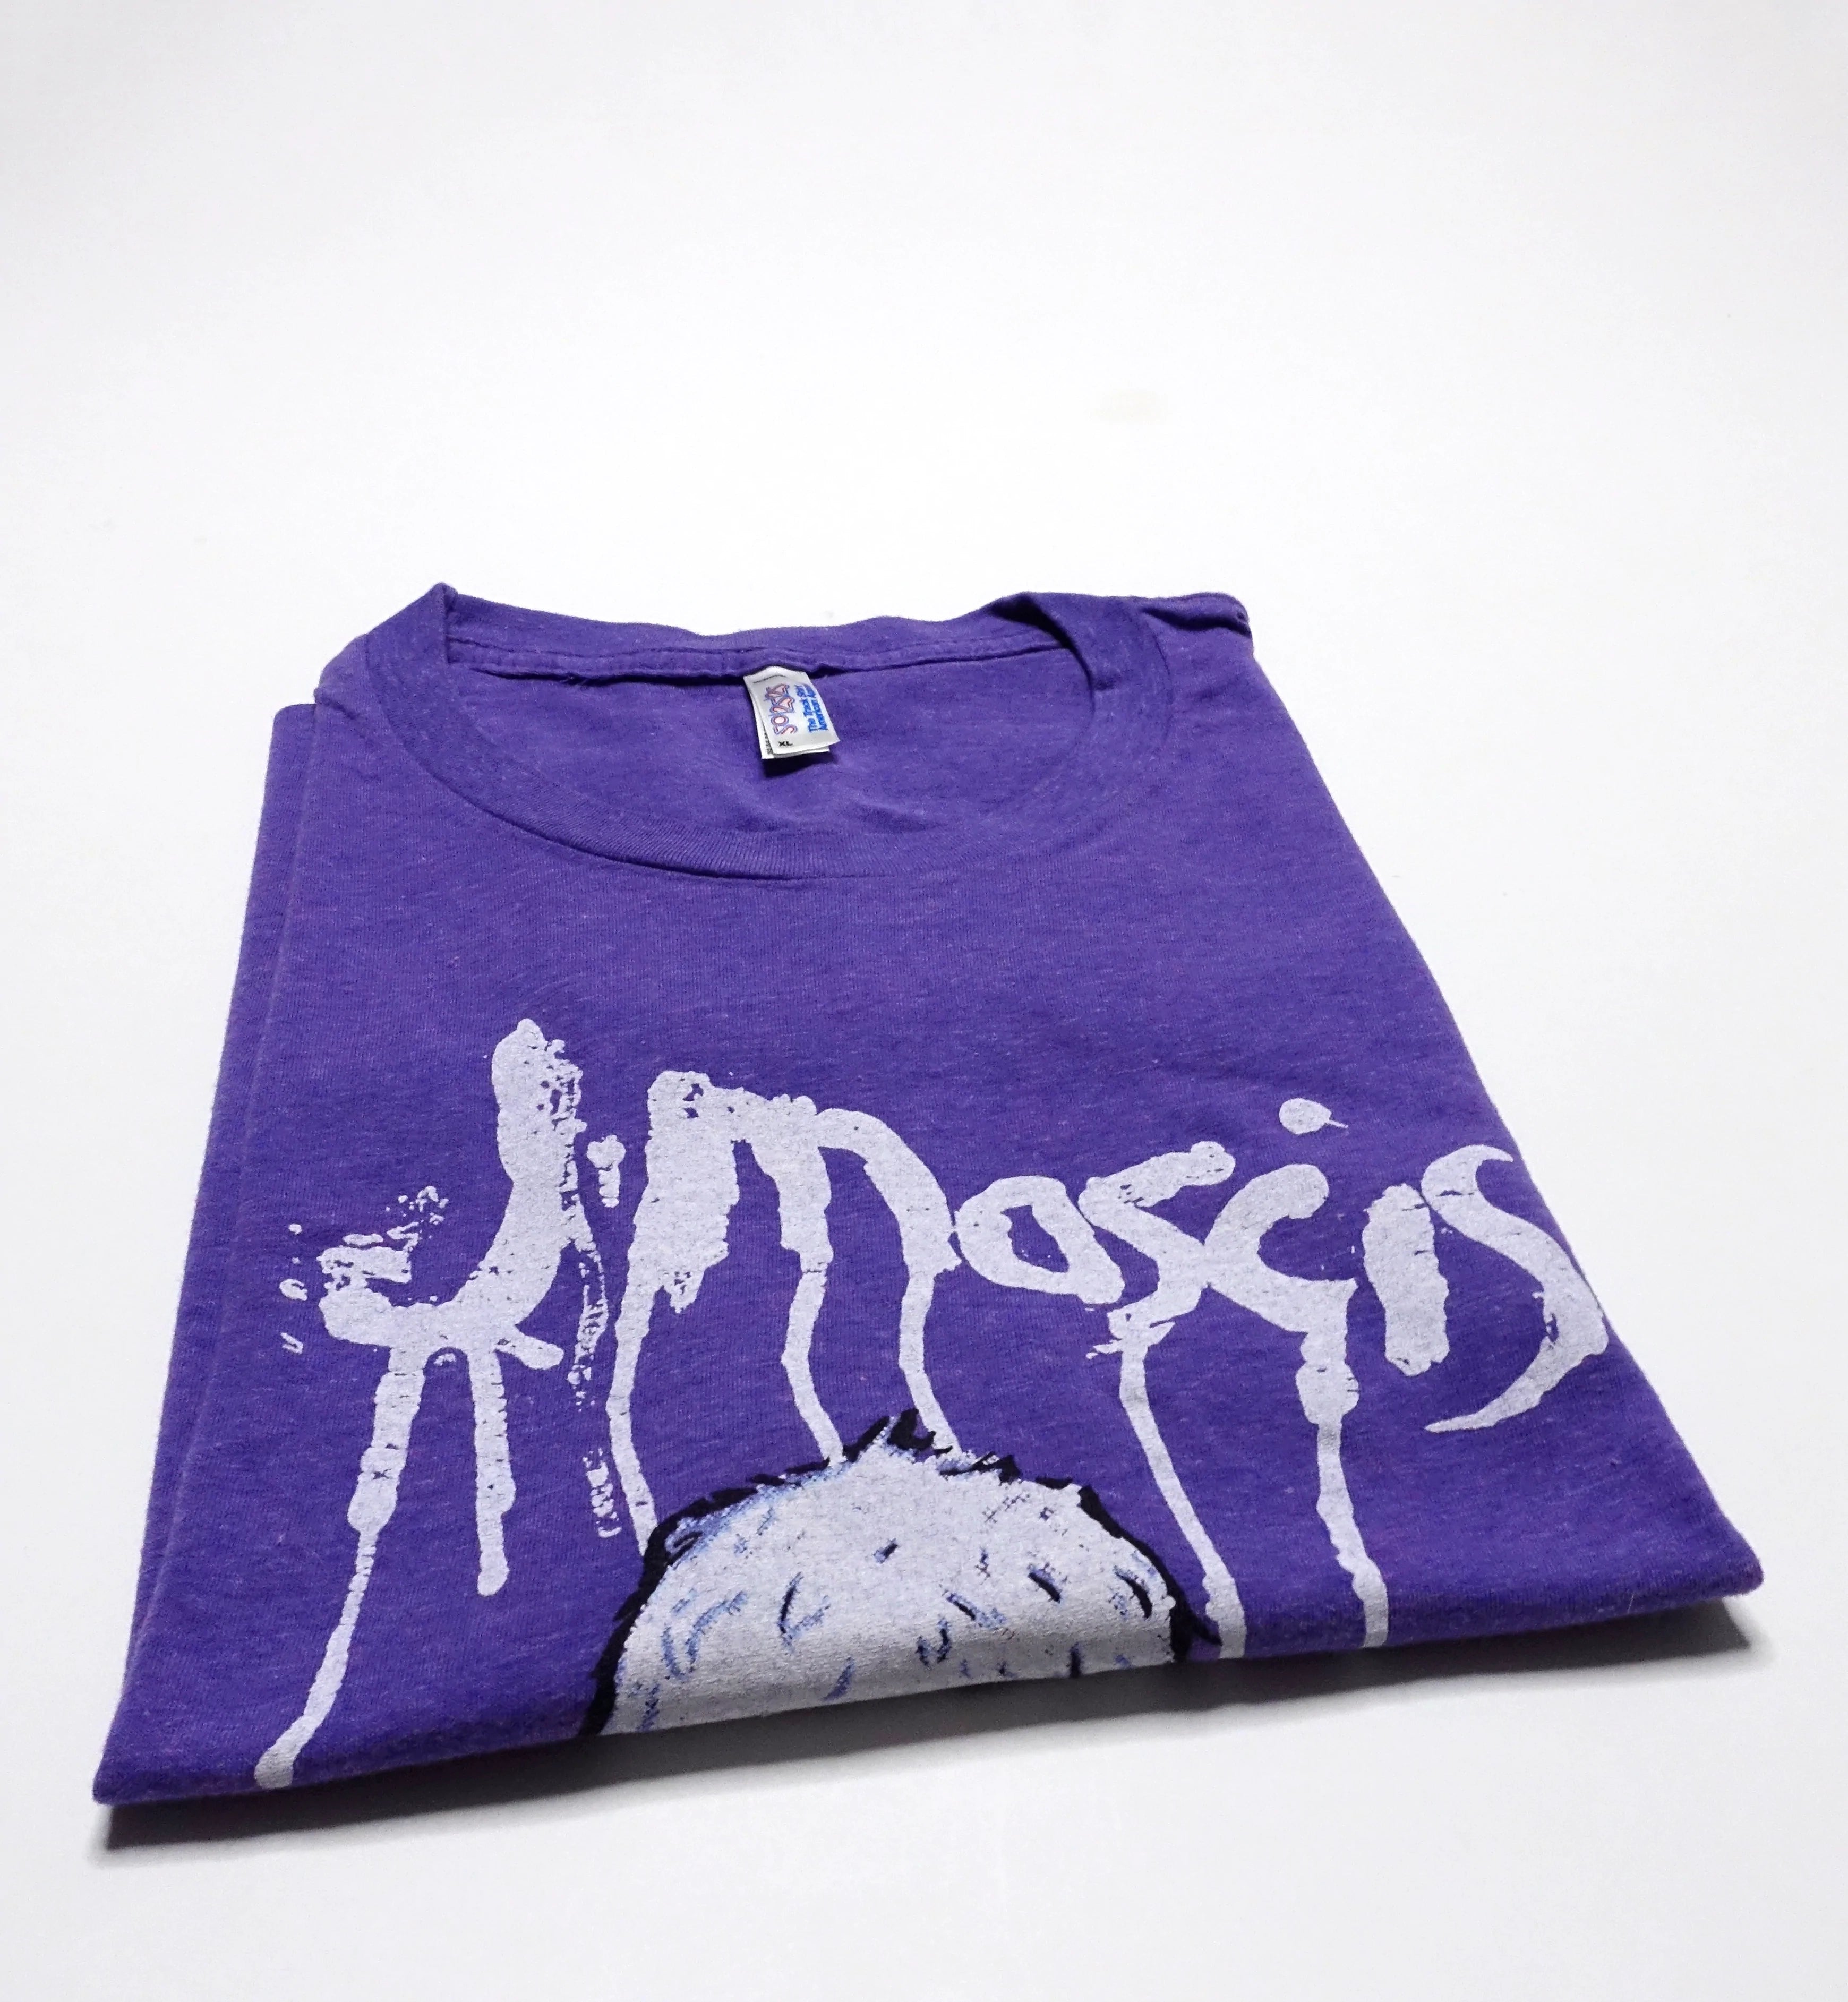 J Mascis – Several Shades Of Why 2011 Tour Shirt Size XL